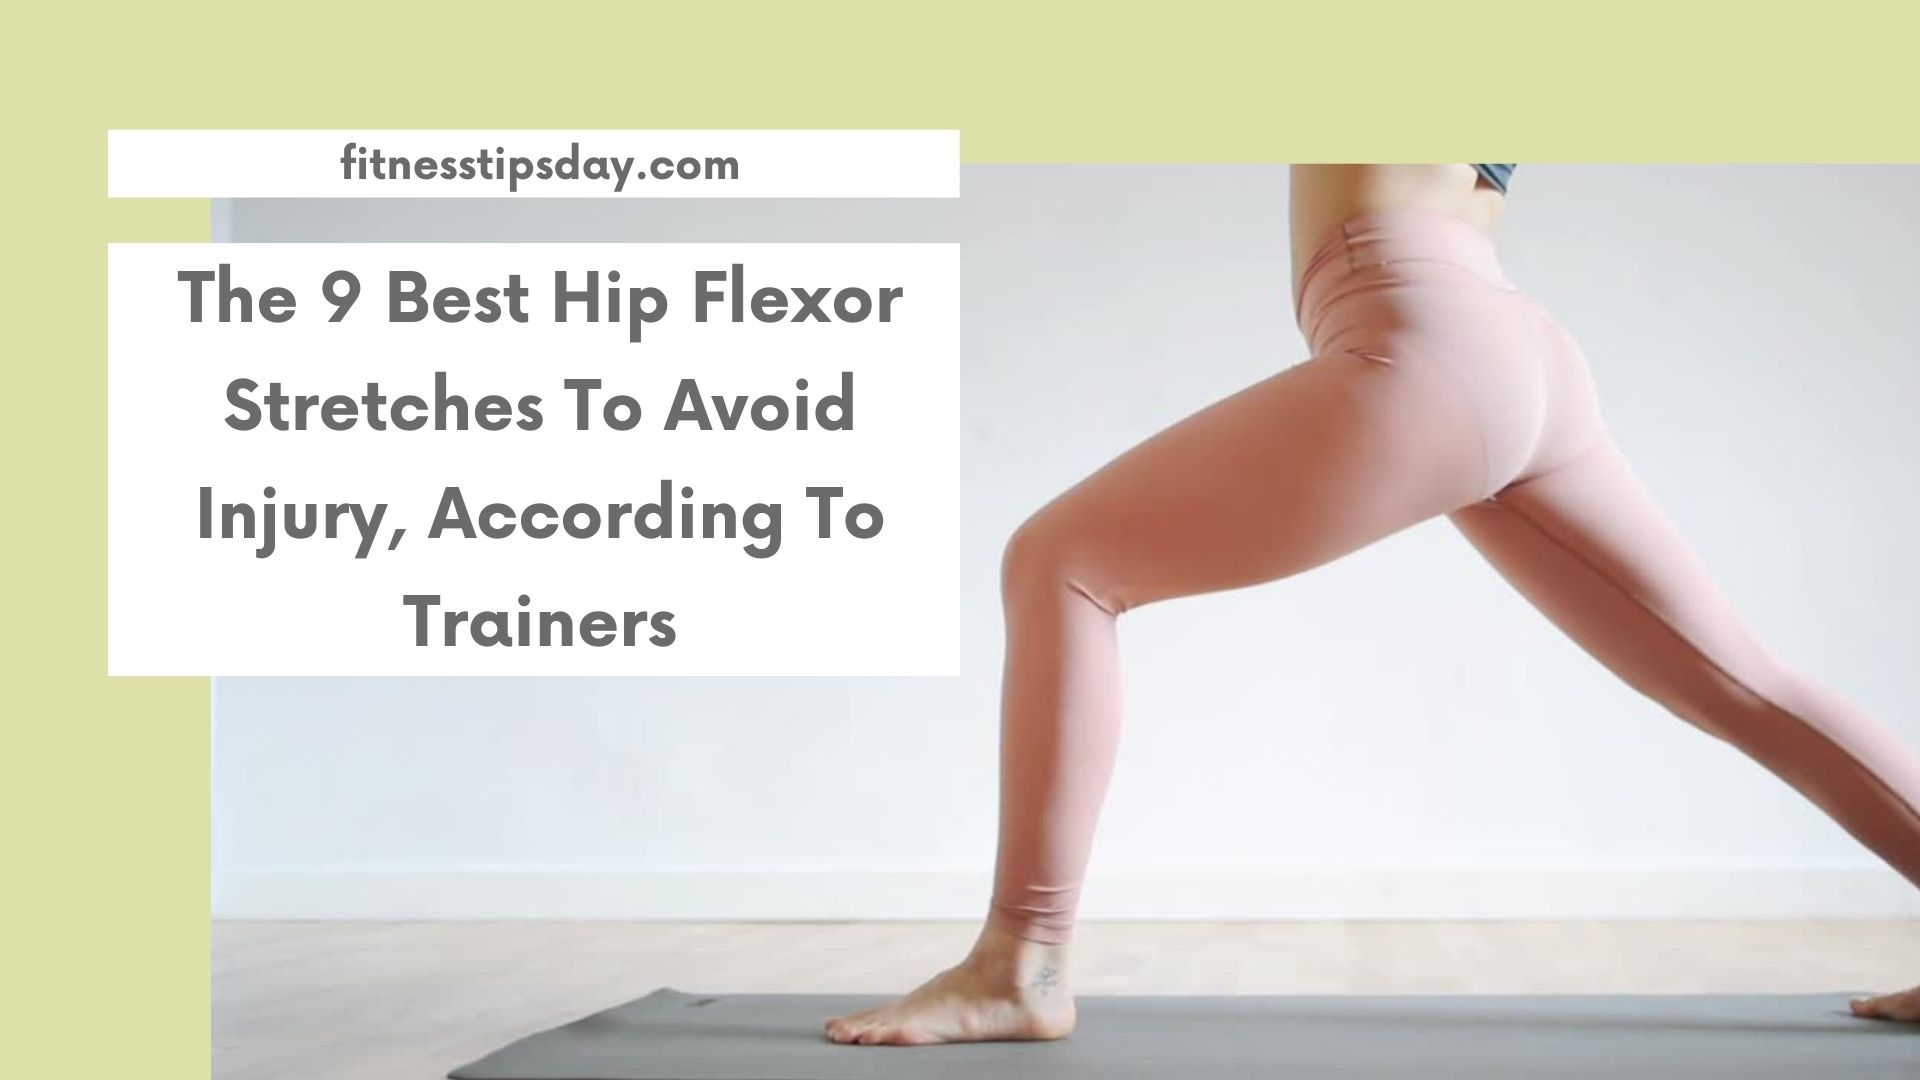 The 9 Best Hip Flexor Stretches To Avoid Injury, According To Trainers